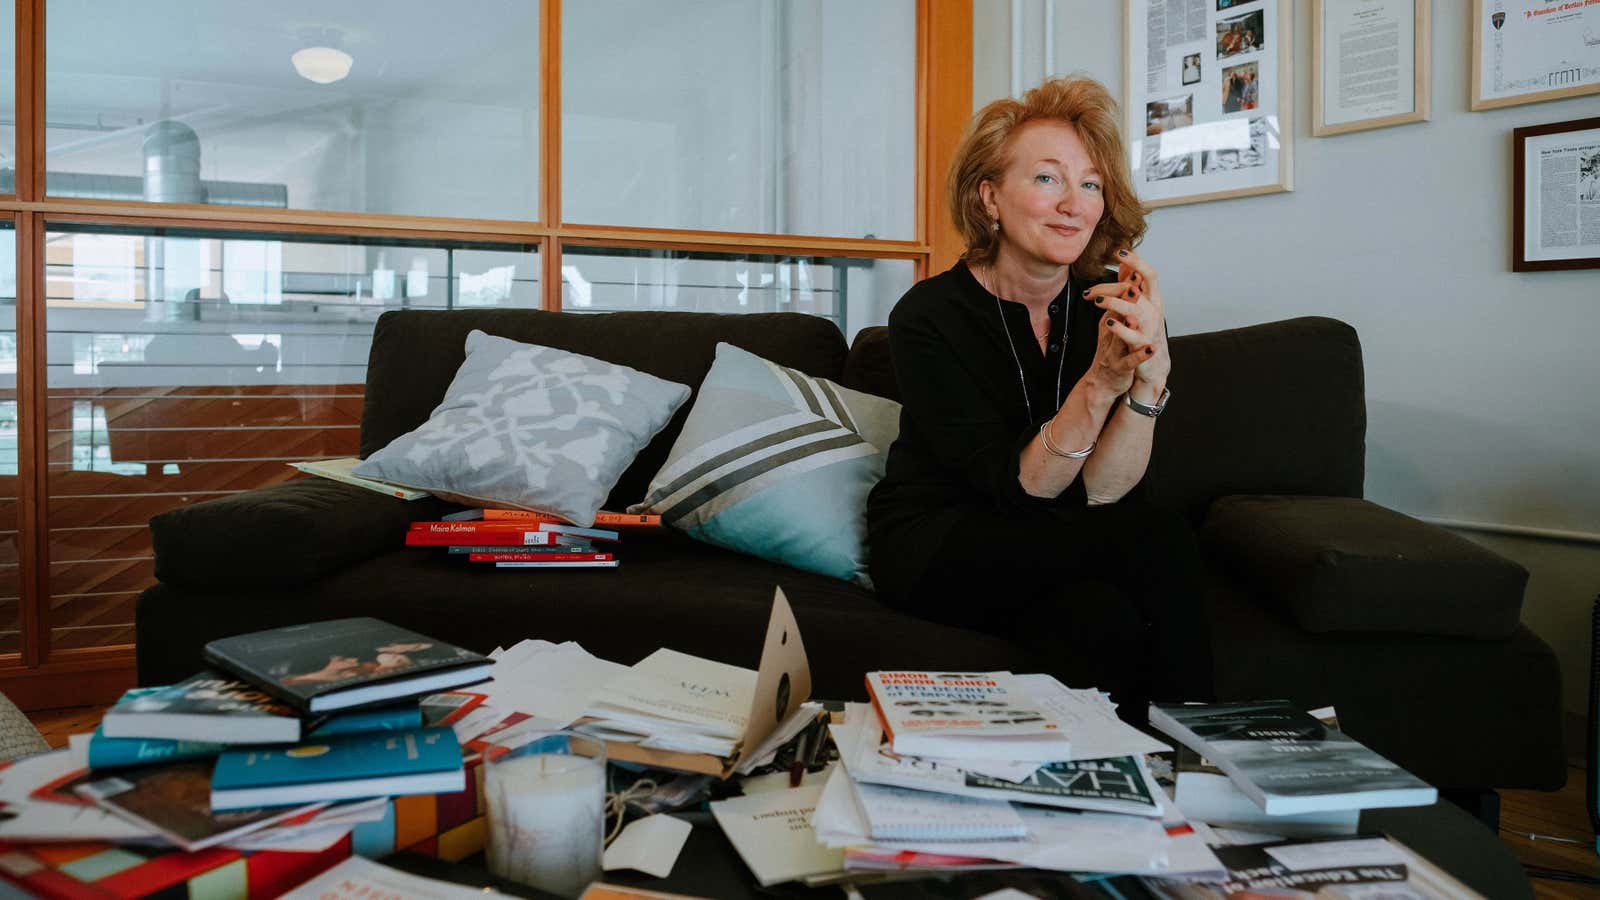 Let Krista Tippett’s email auto-reply calm your overworked spirit